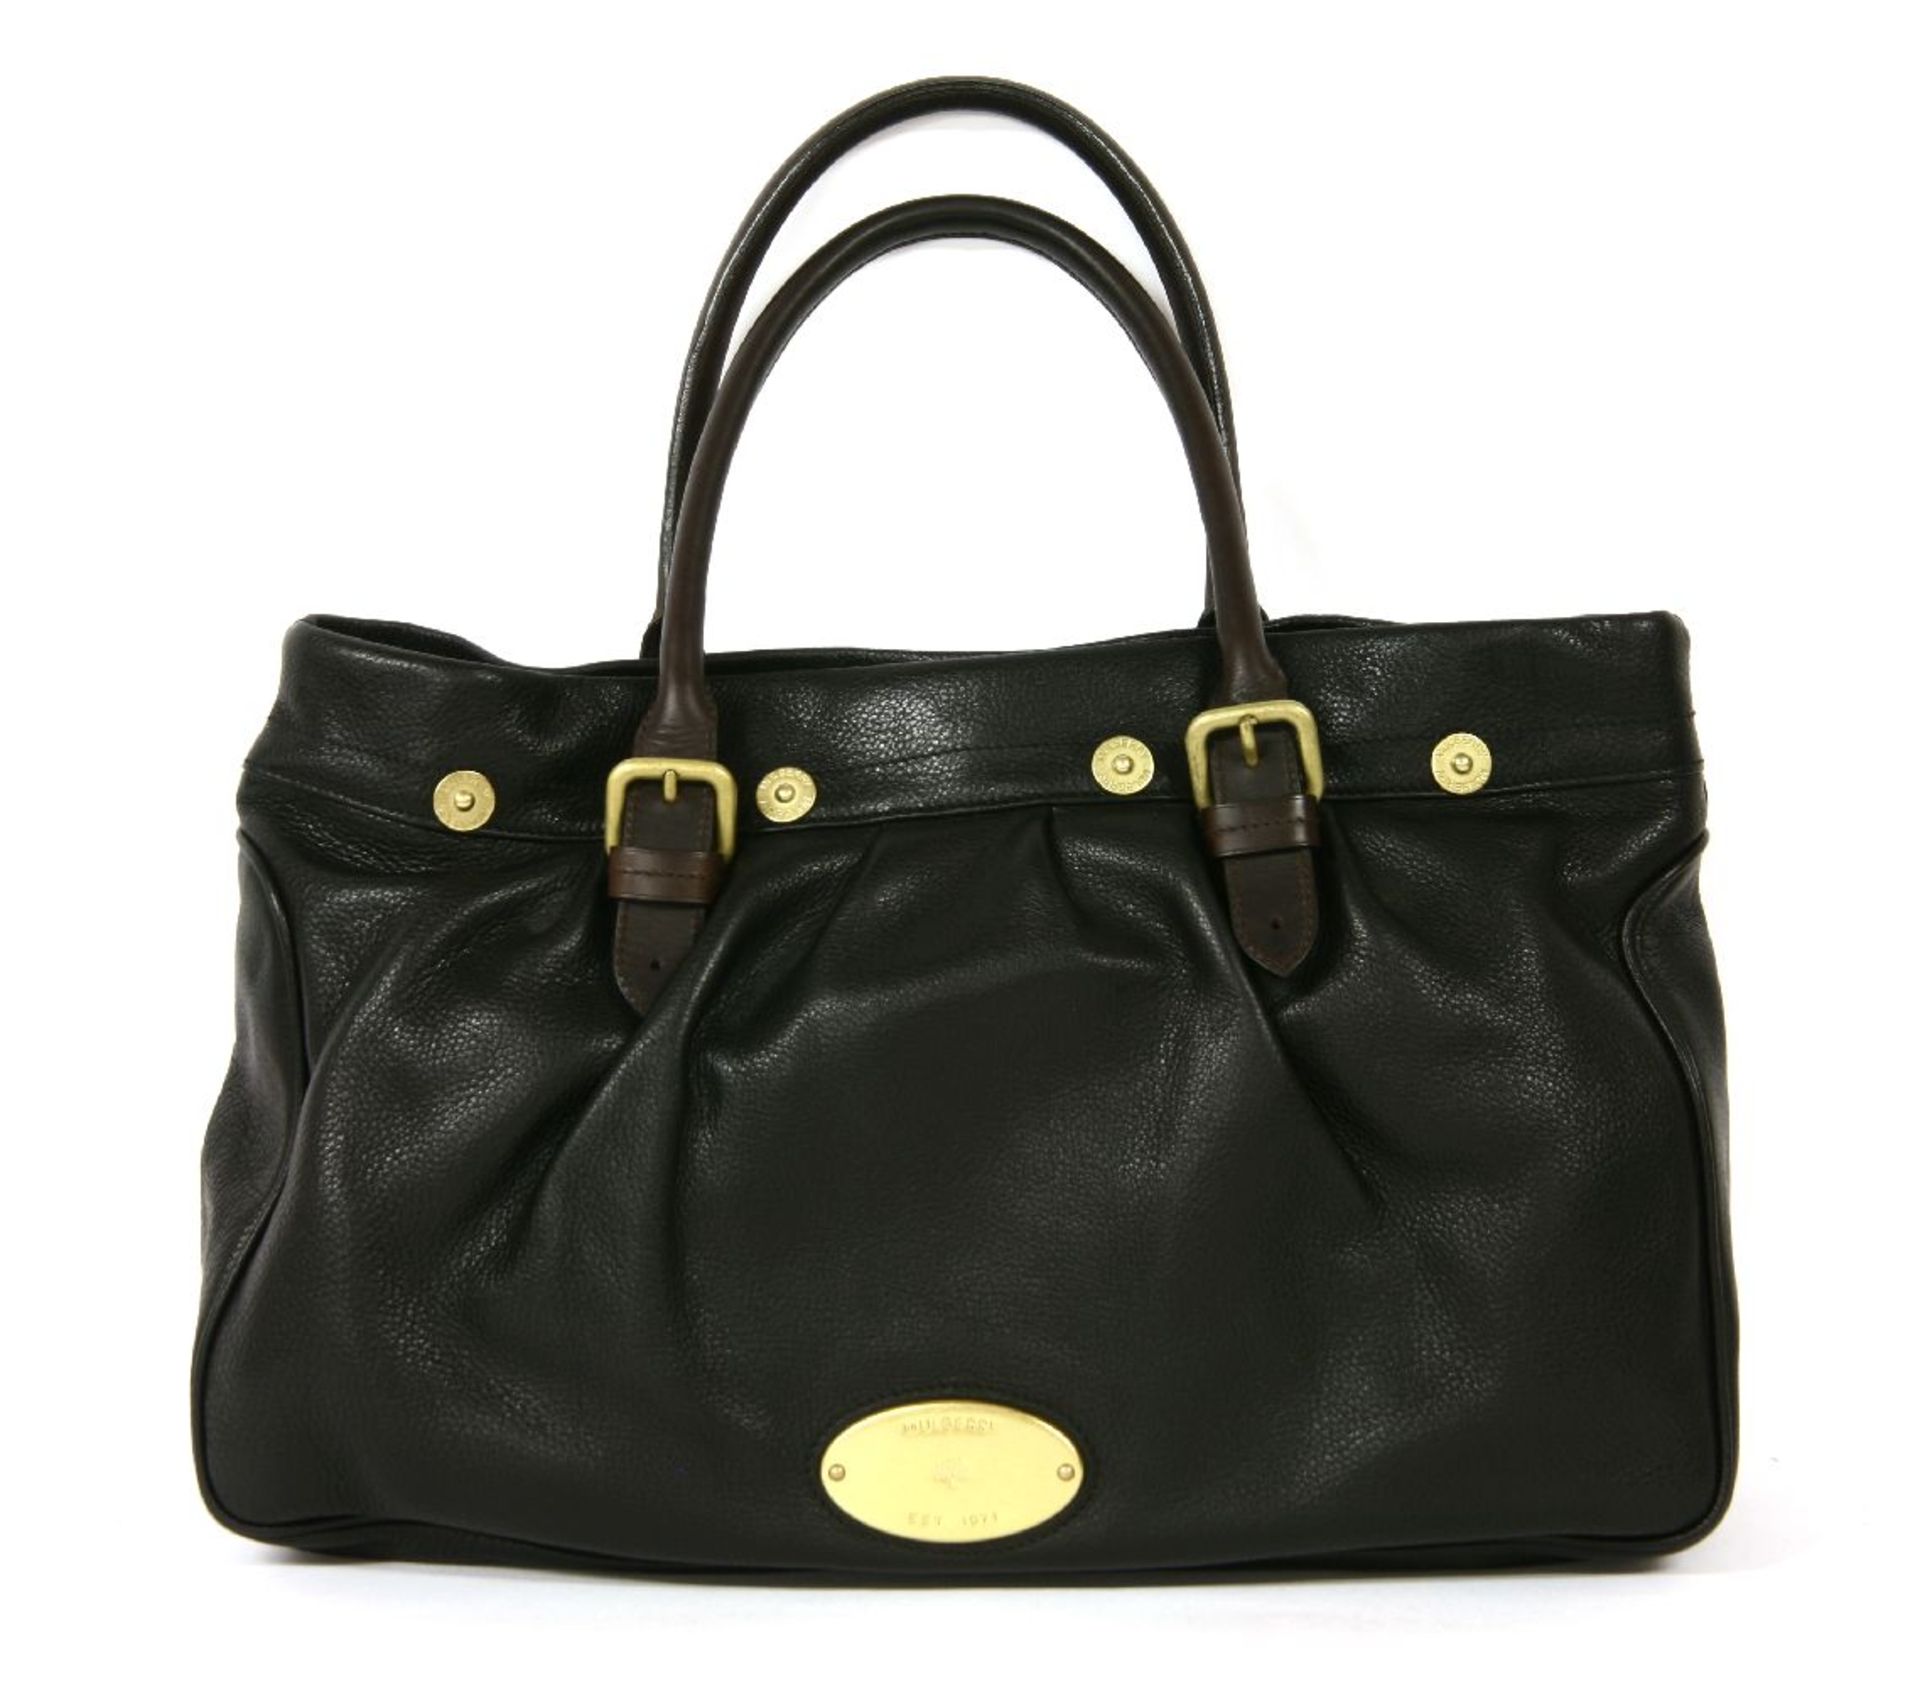 A Mulberry 'Mitzy Shopper' black leather handbag,black pebbled leather with dual roll chocolate